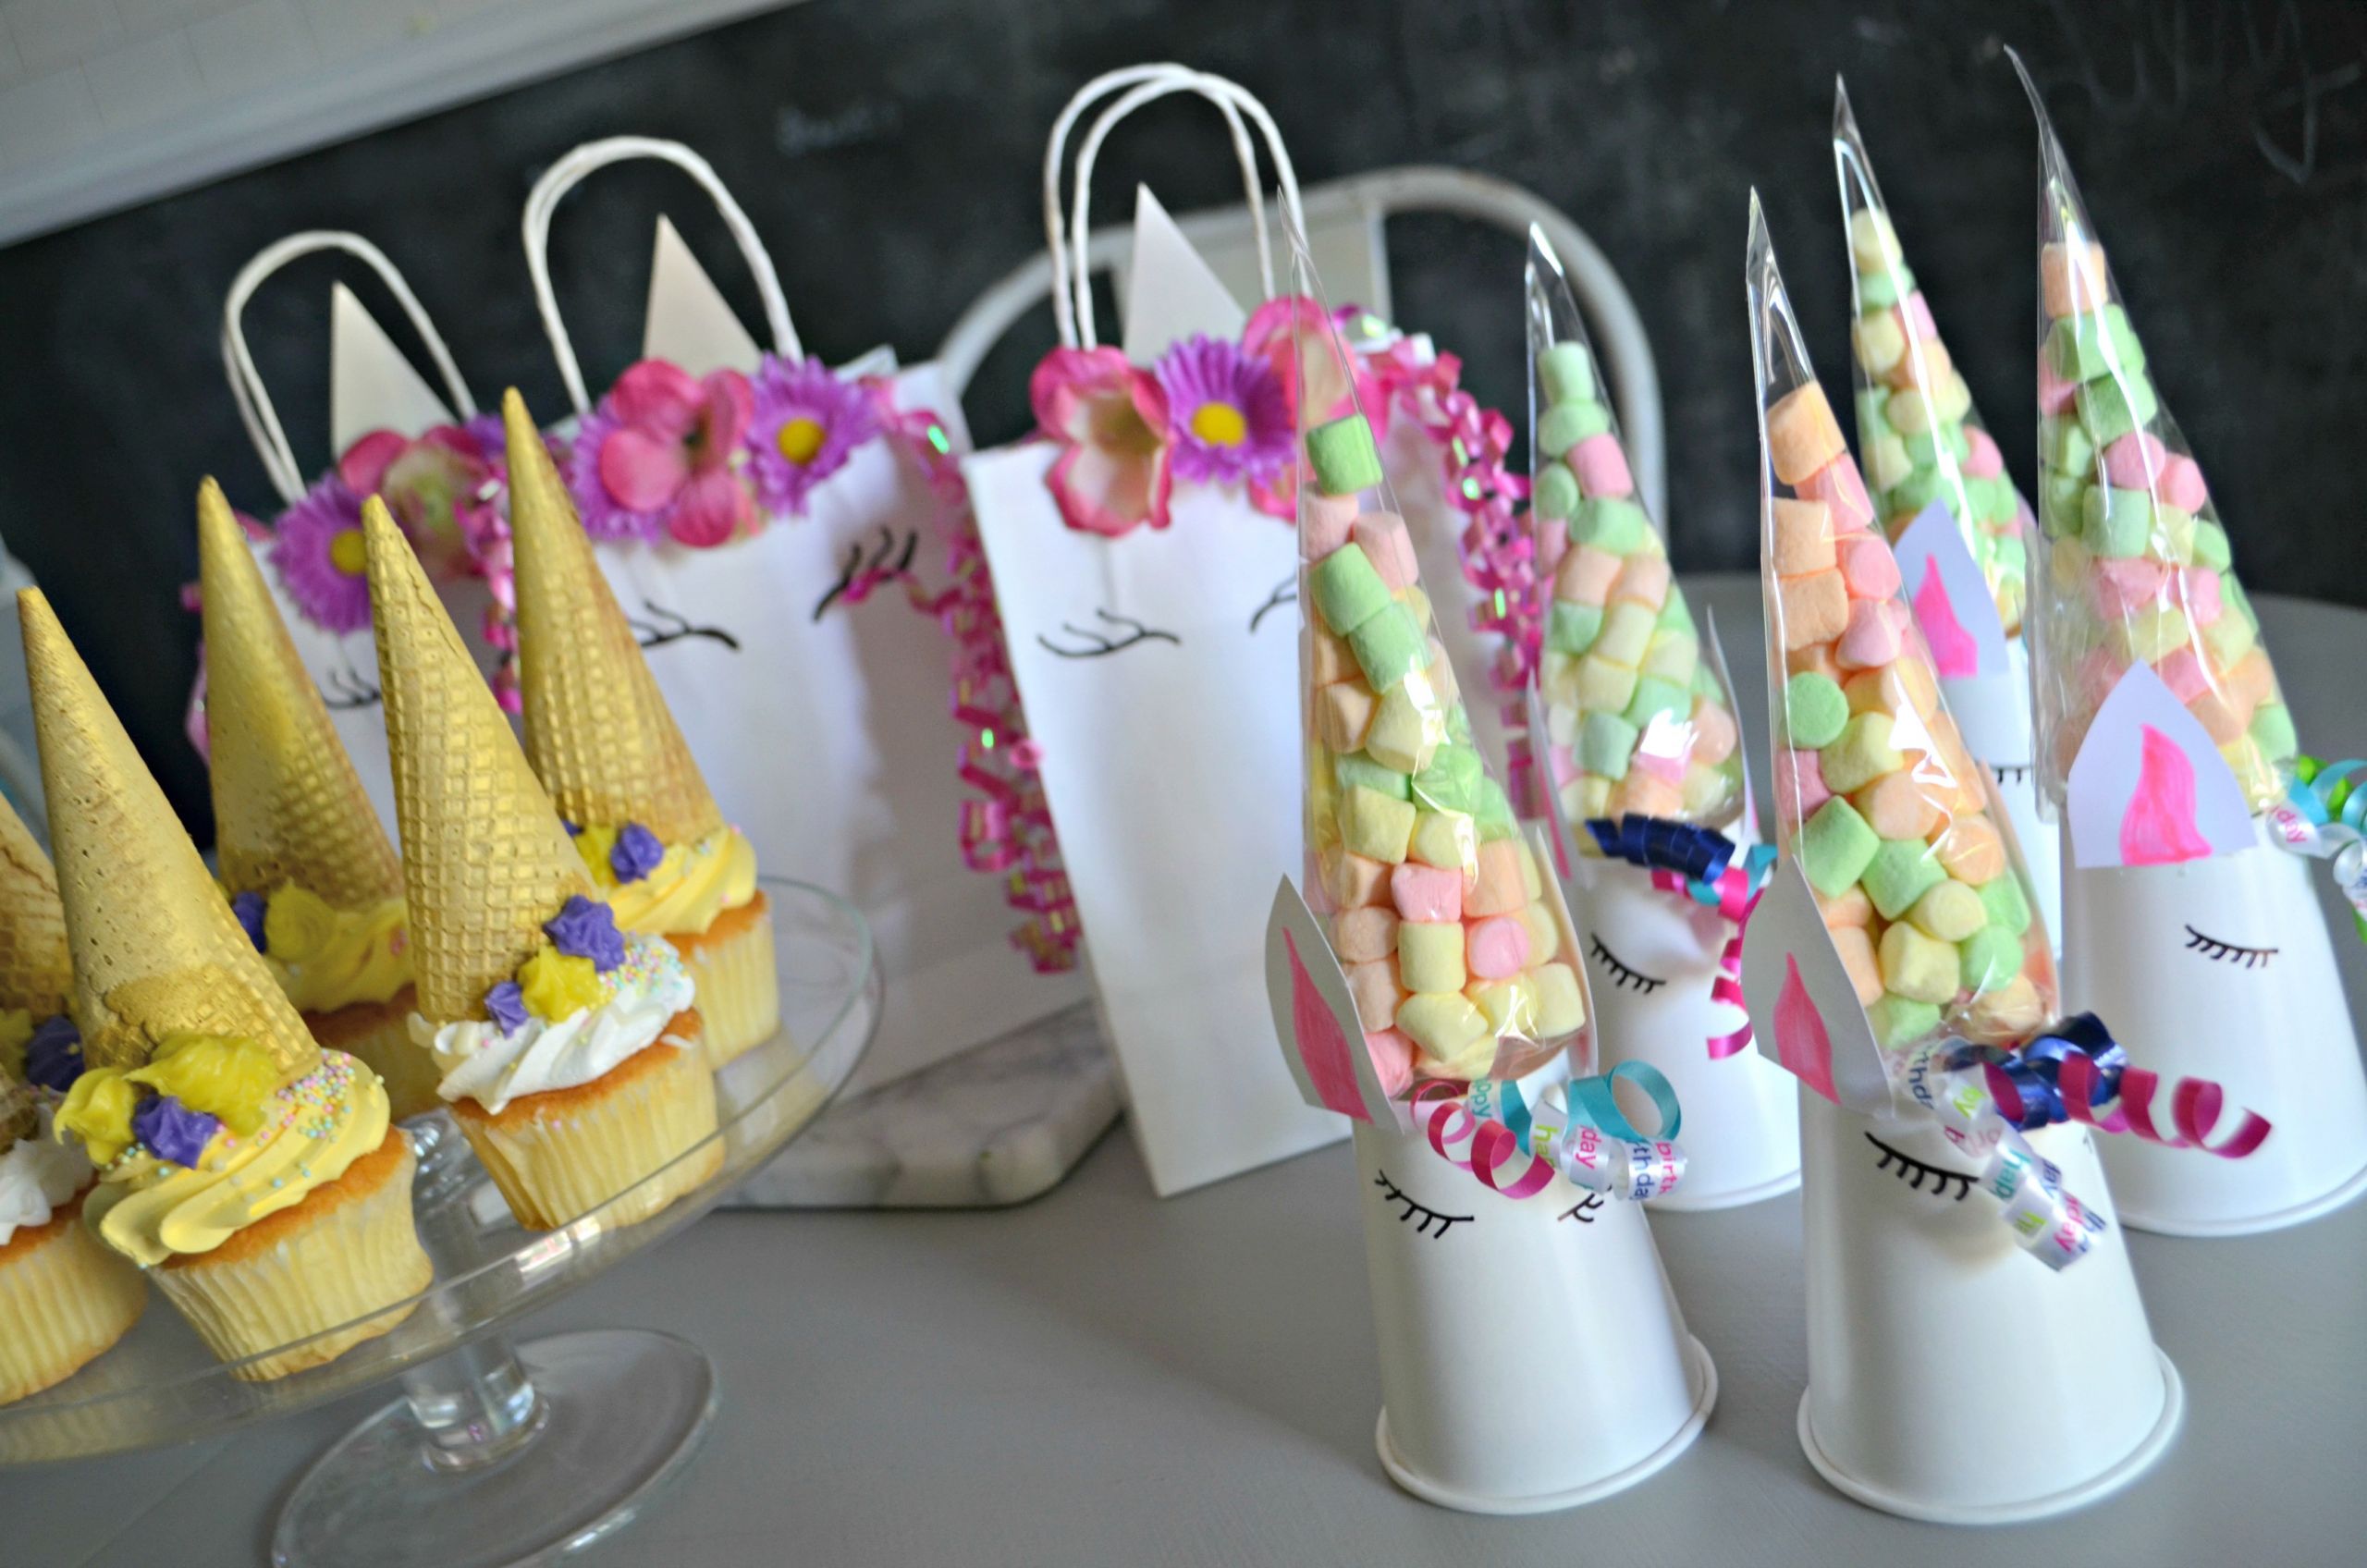 Unicorn Party Decoration Ideas
 Make These 3 Frugal Cute and Easy DIY Unicorn Birthday